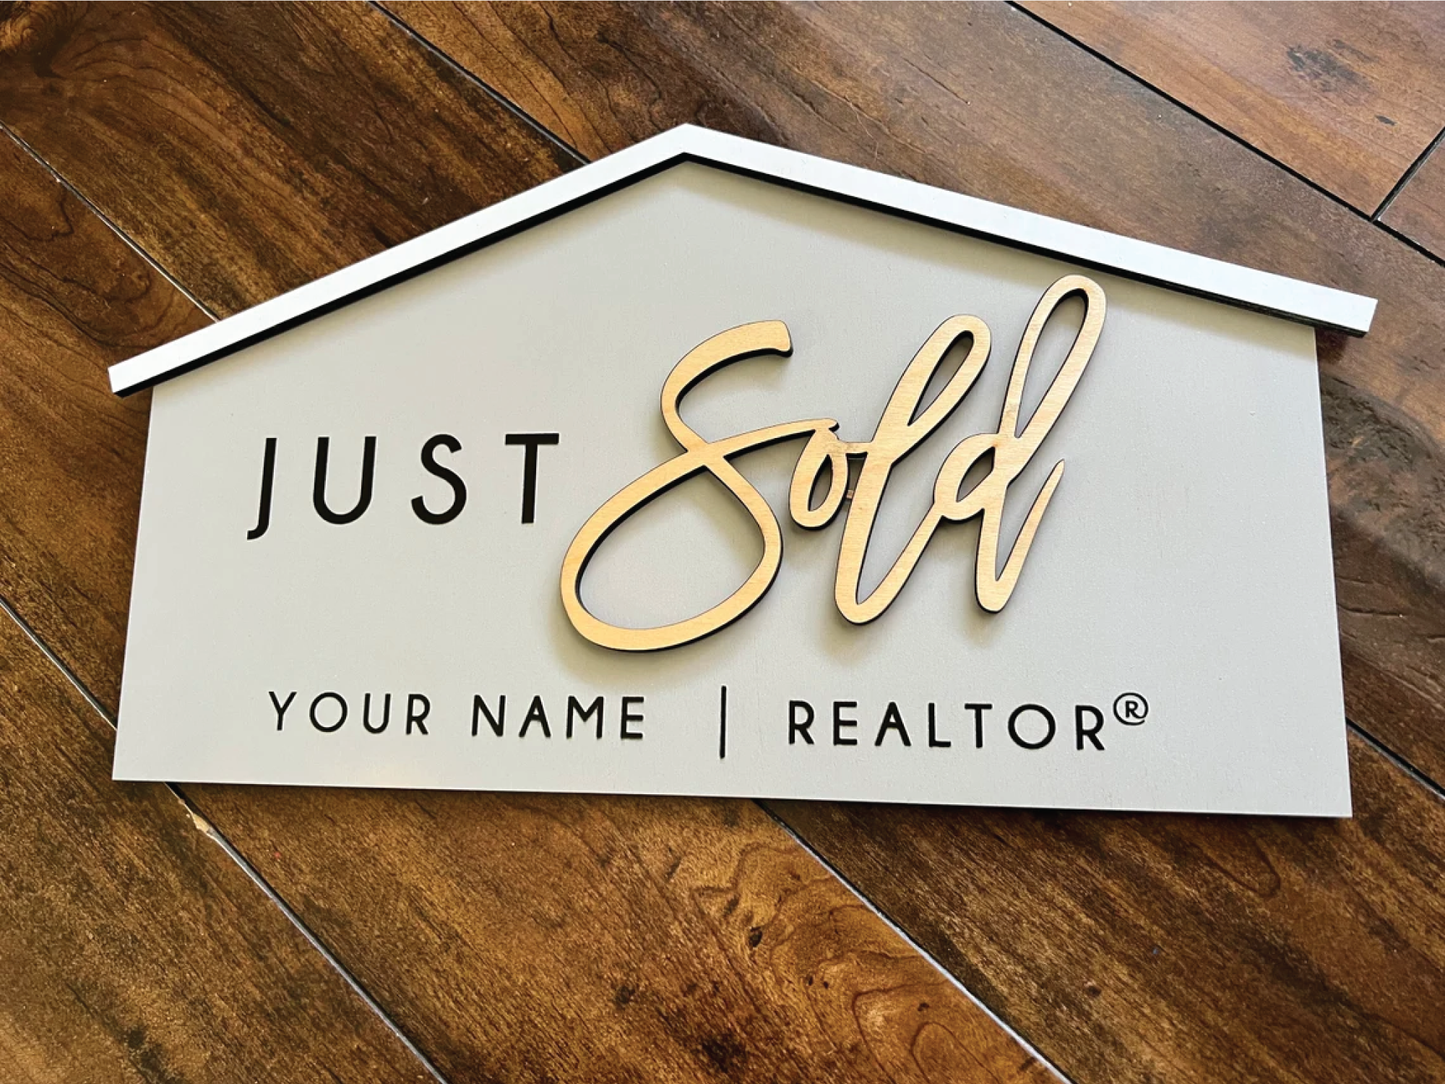 Real estate closing sign - Just sold sign